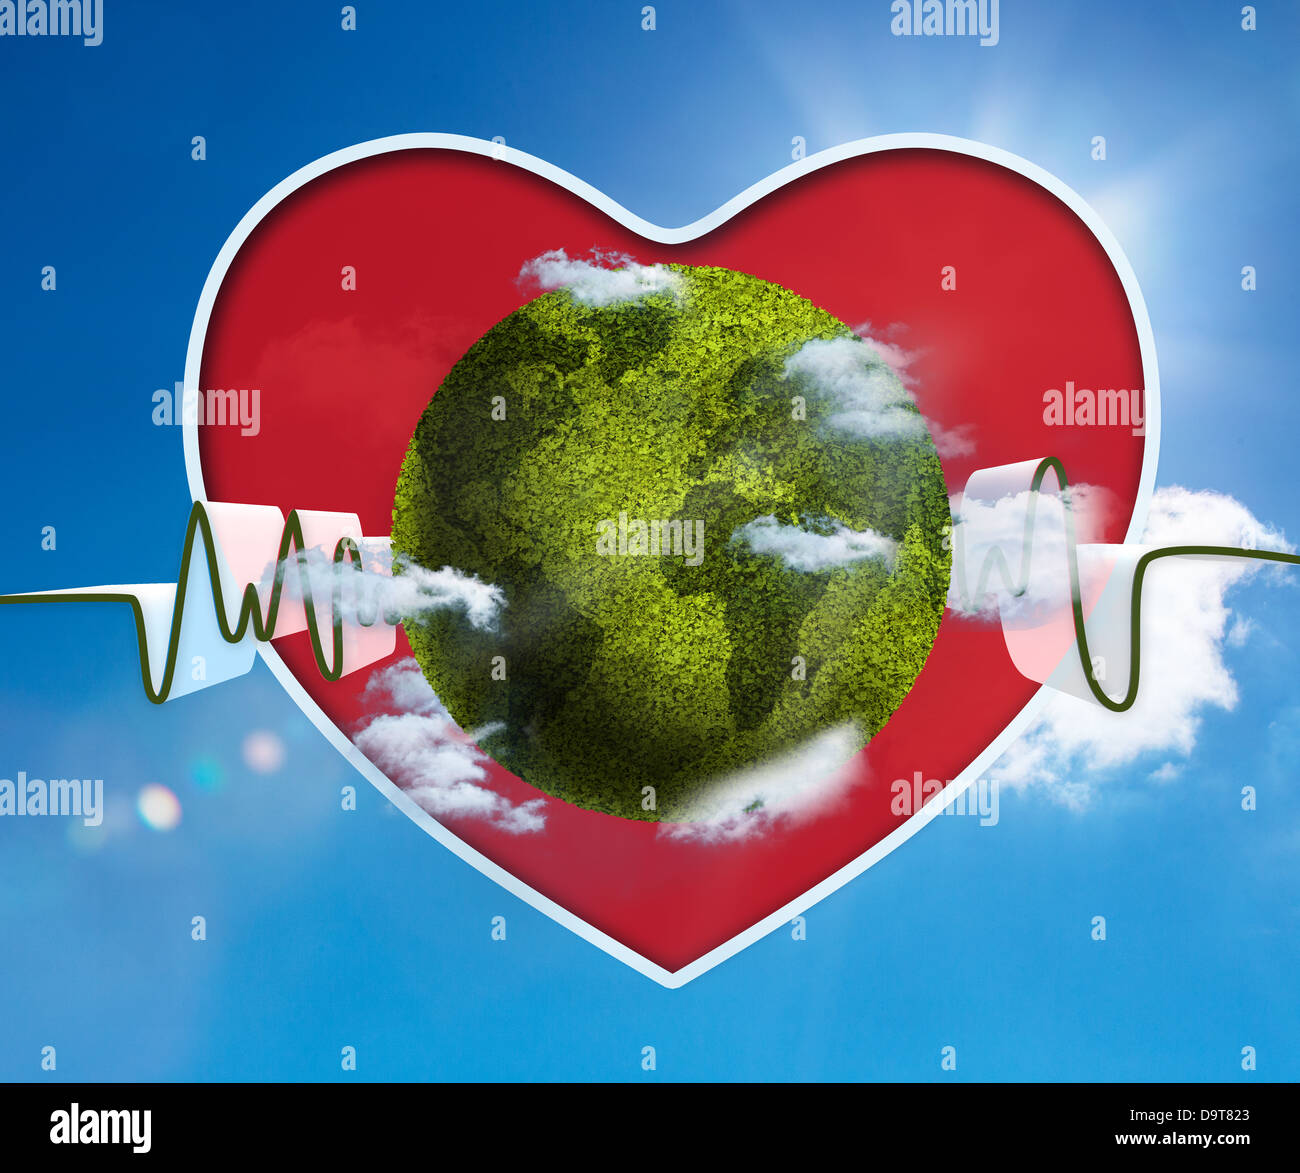 Green and white waveform with green earth and red heart Stock Photo